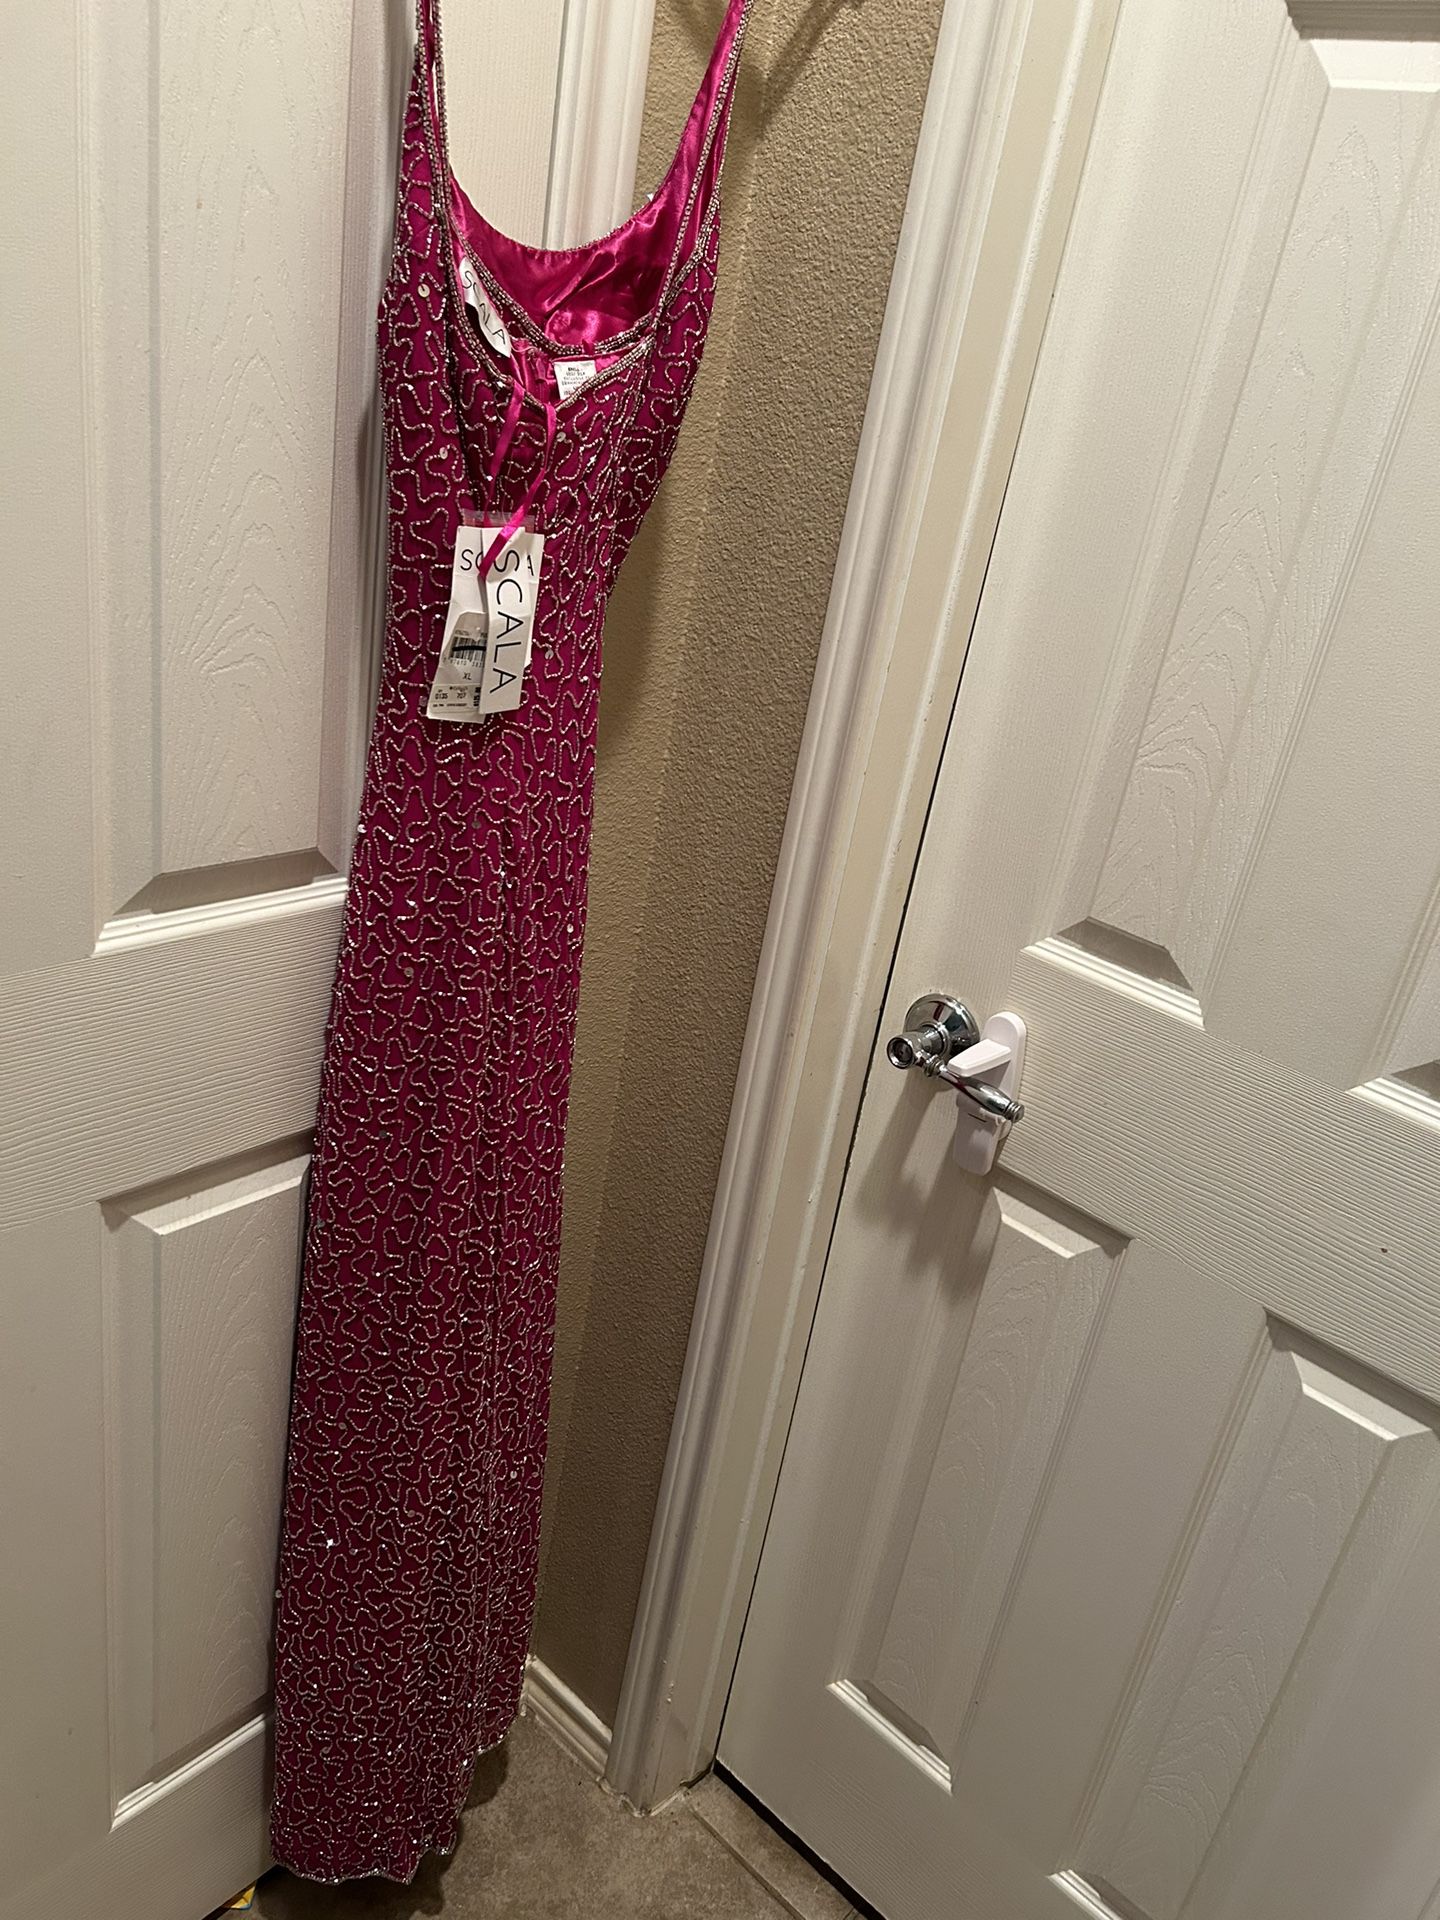 Prom Dress Size 12 Never Be Use 